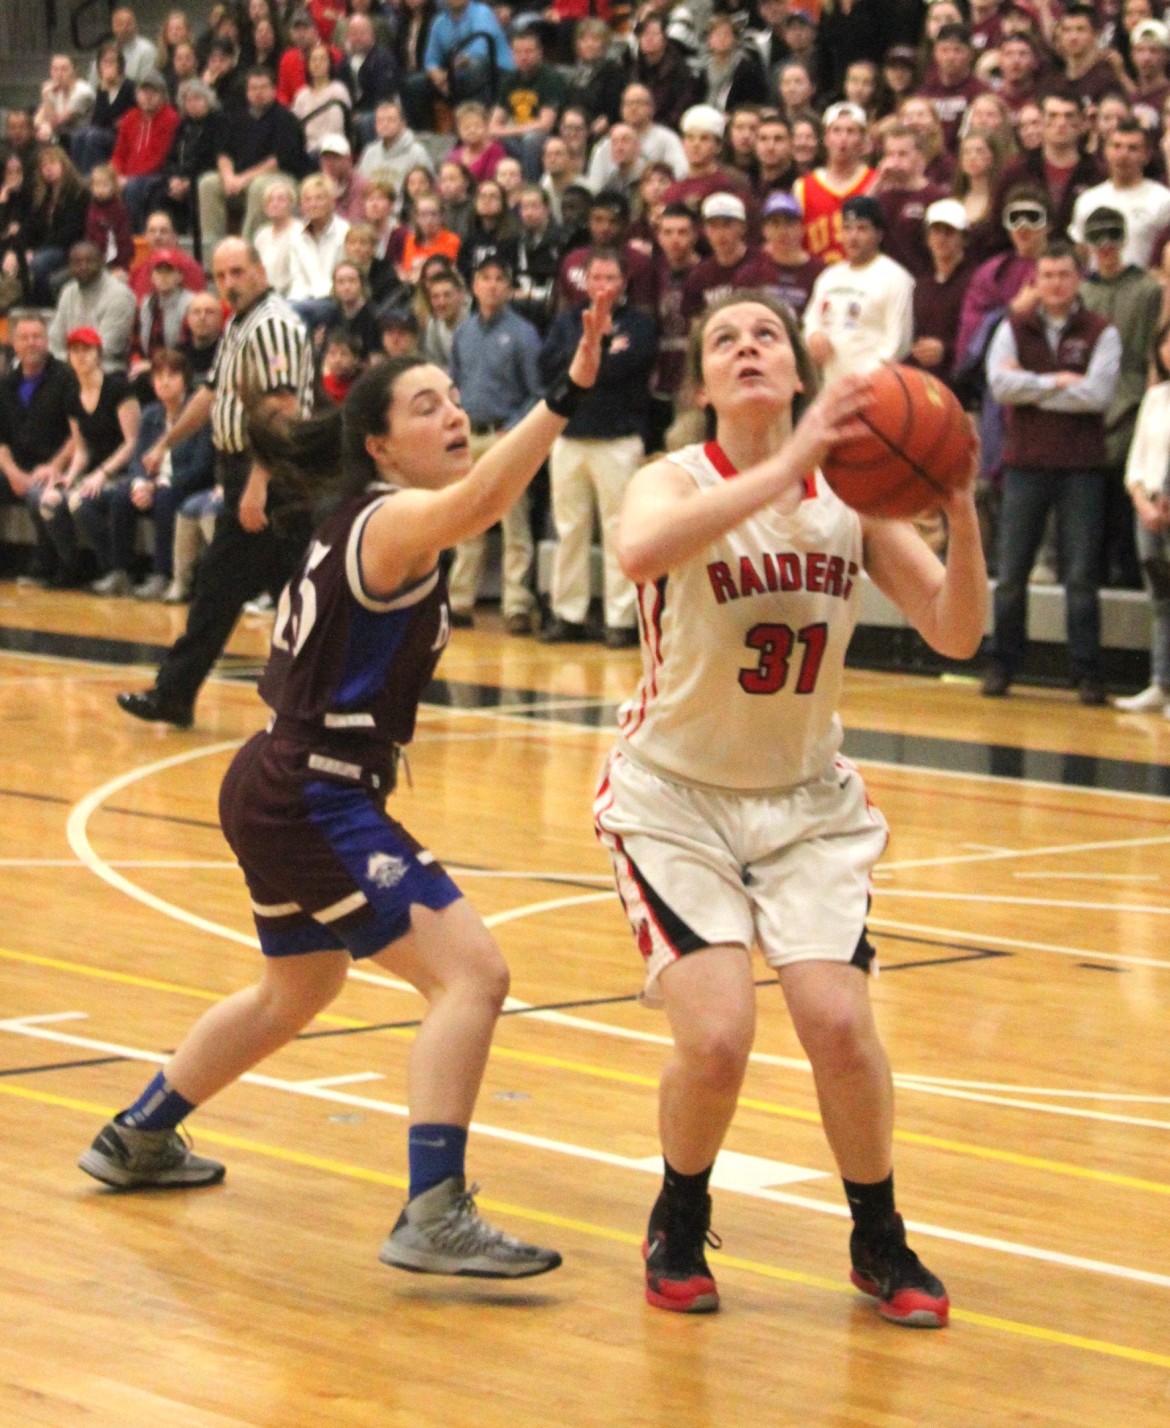 Katelyn Rourke scored 12 points for Watertown in the North Section final victory over Belmont.